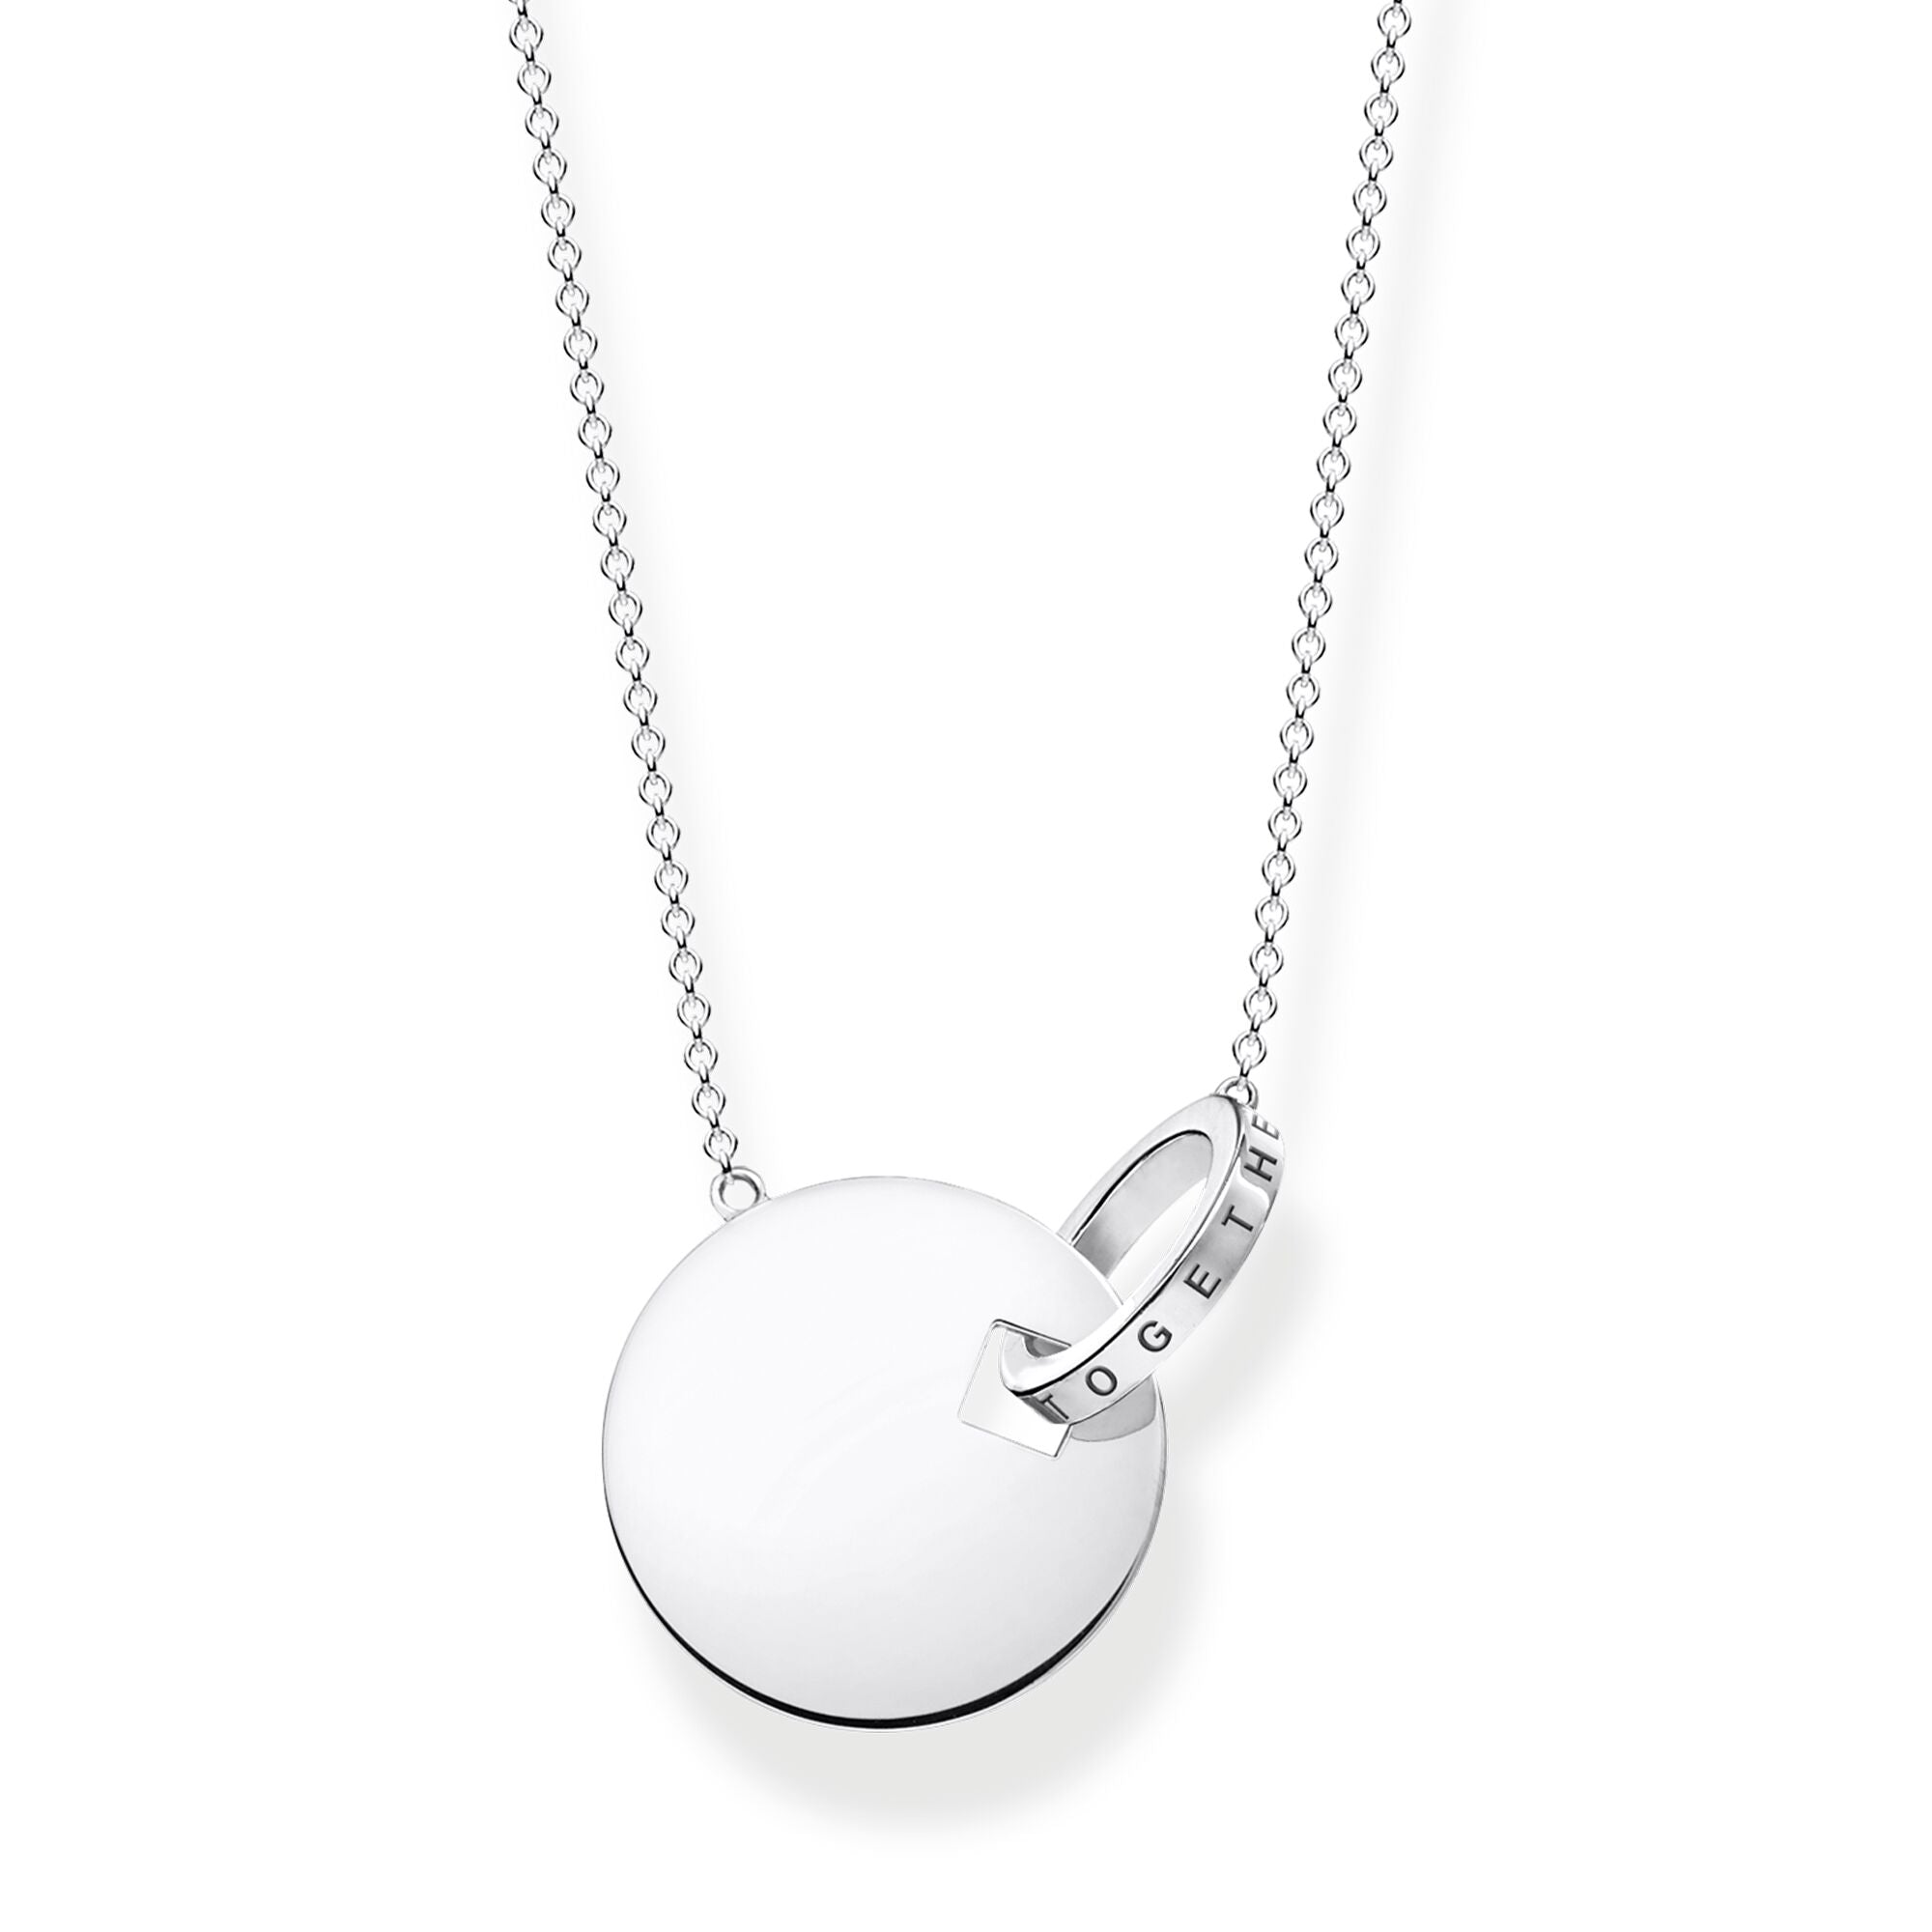 Together Coin With Ring Necklace - Silver - Small